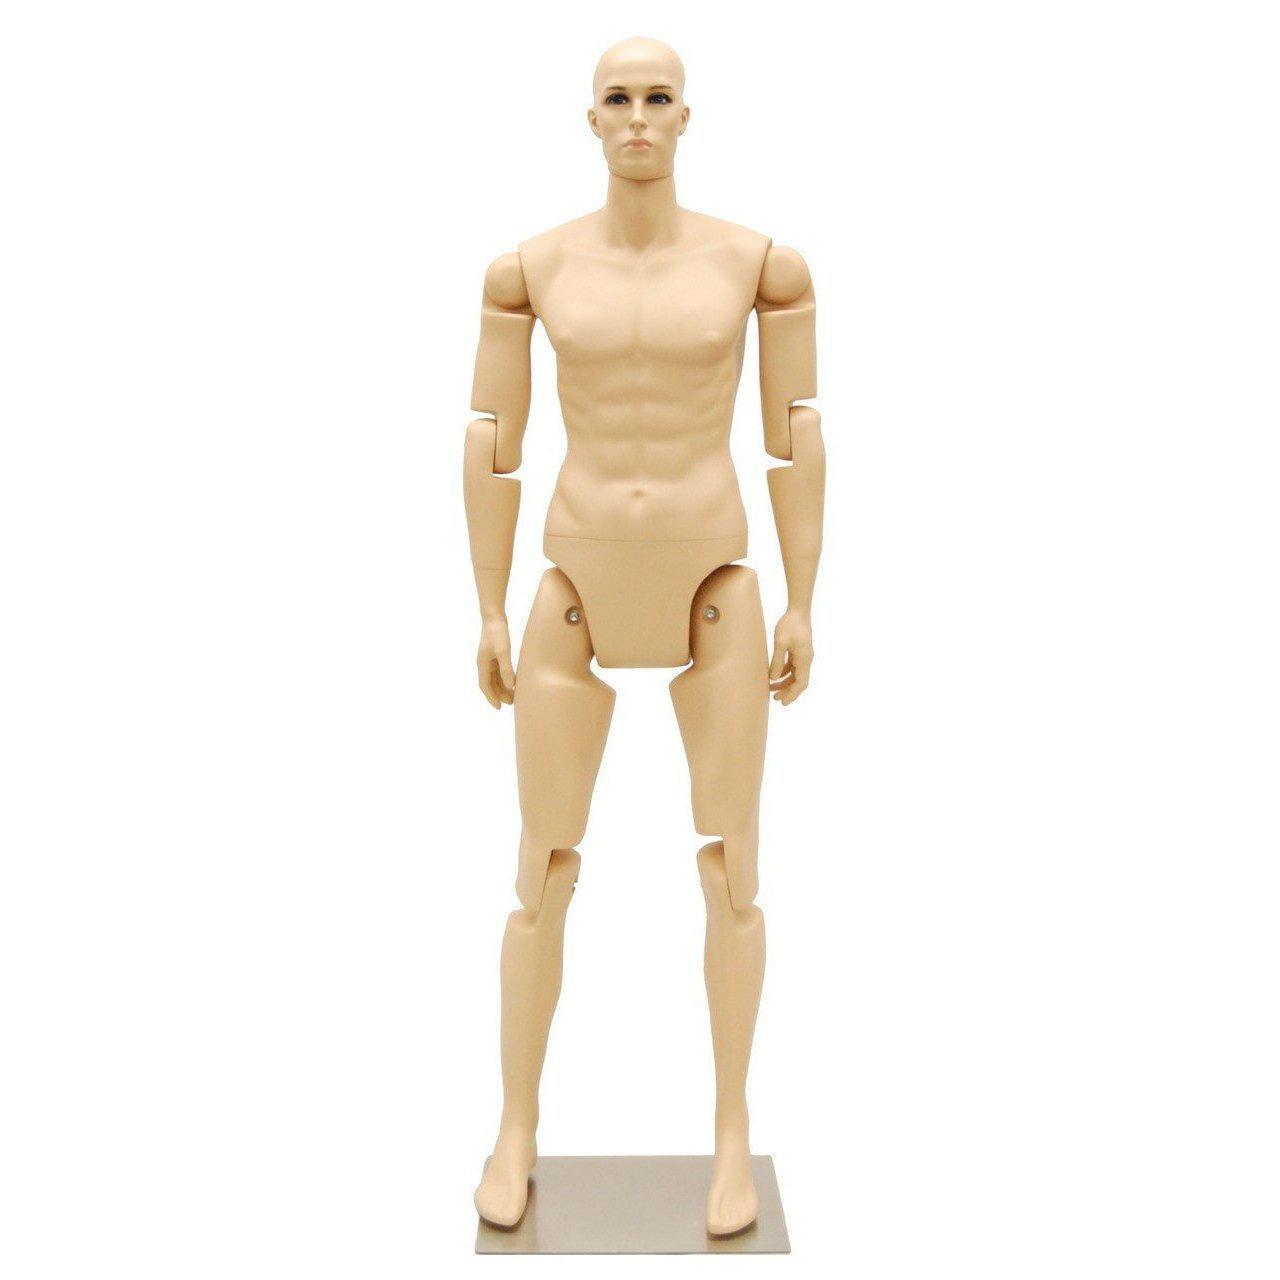 Realistic Child Mannequin MM-514F - Mannequin Mall